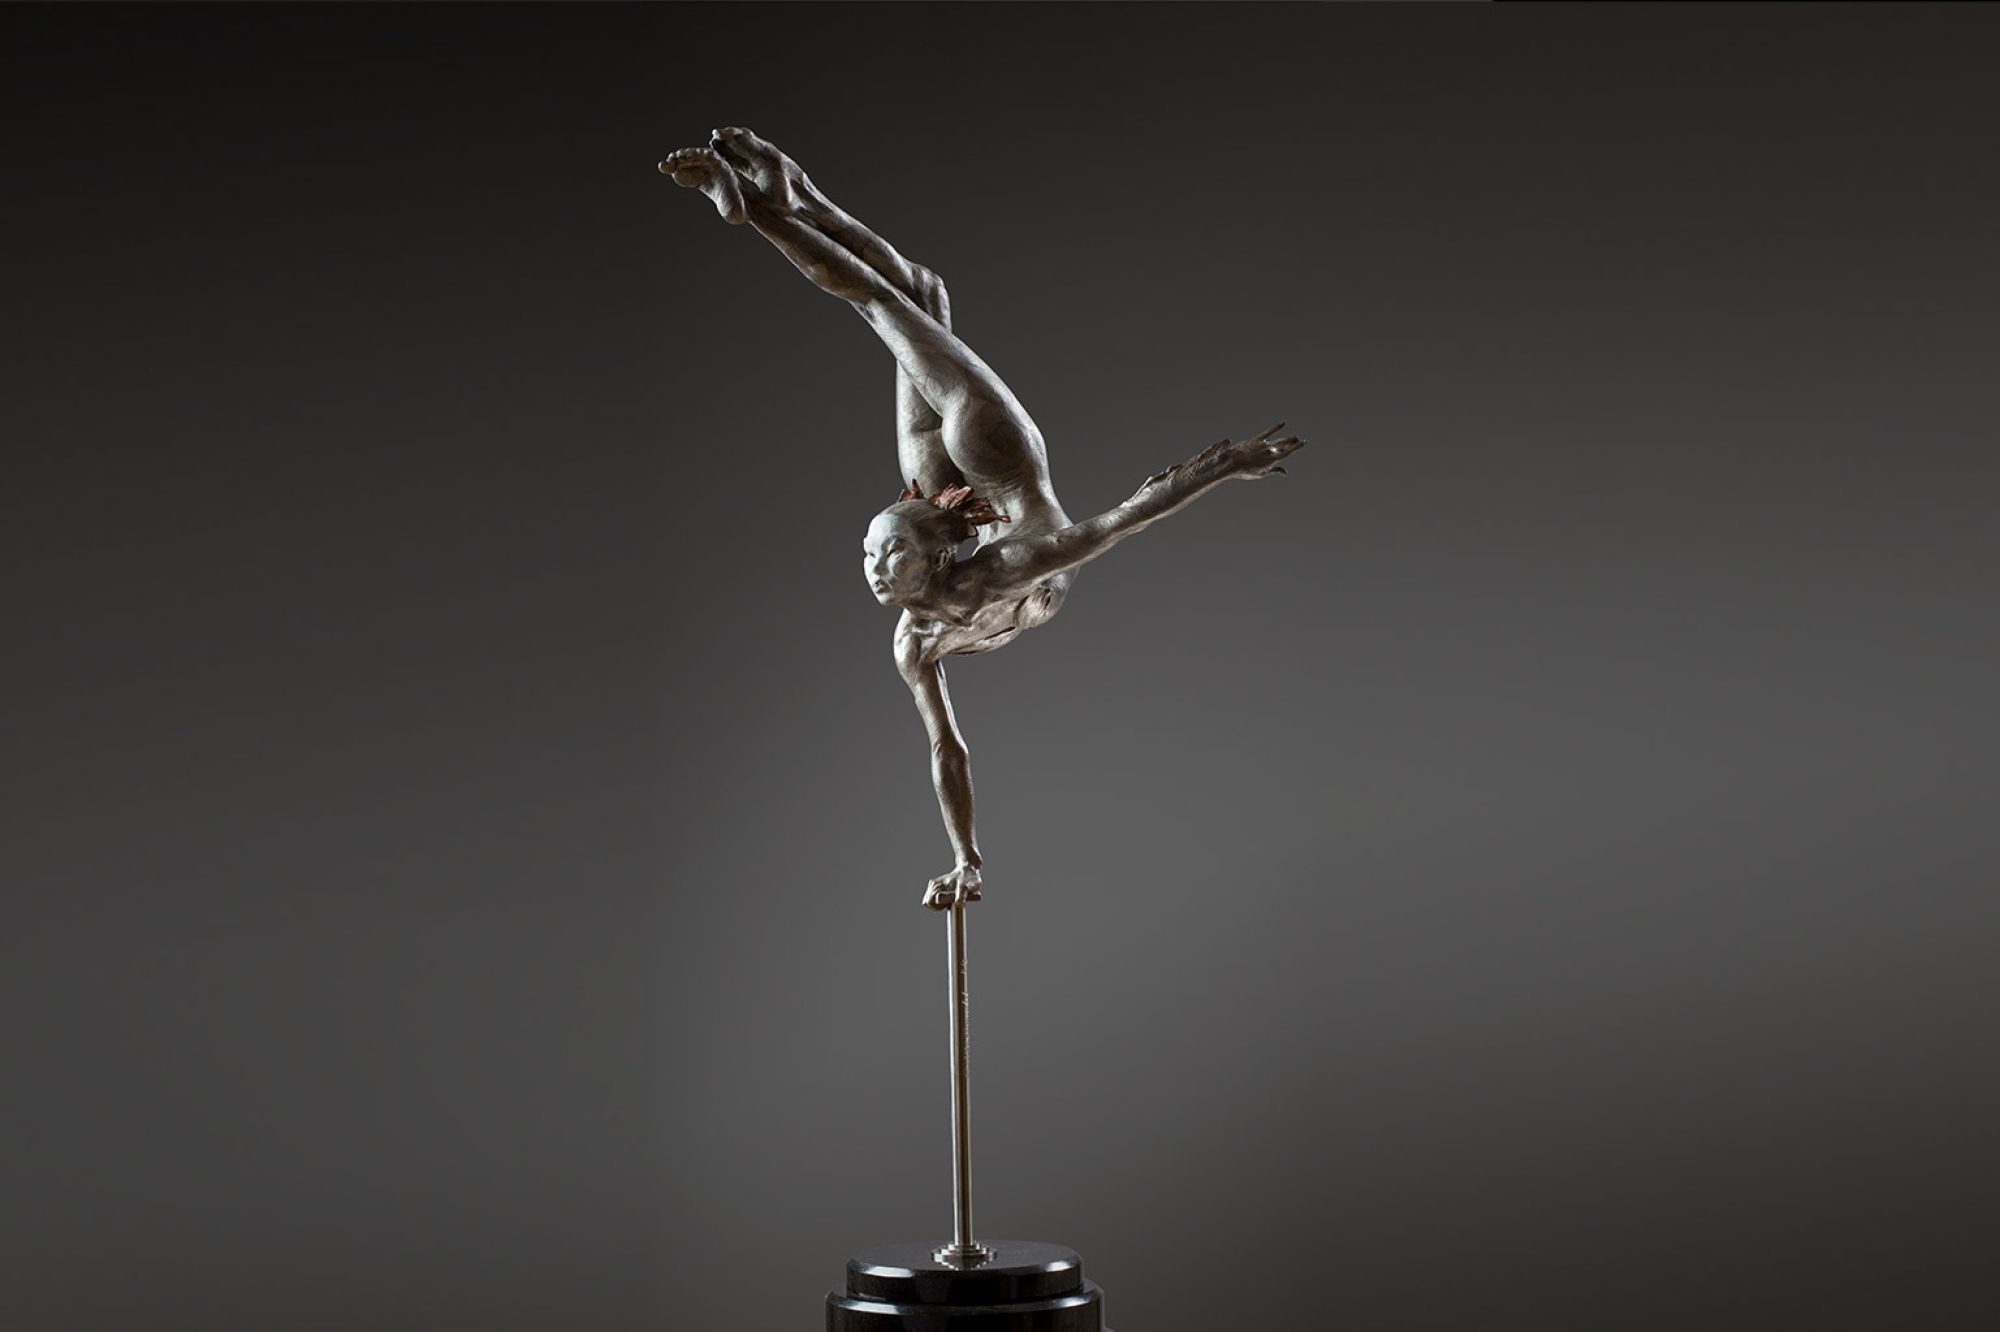 Sculpture: A narrow pole reaches up from the floor, its top covered by a small square rest. From this rest a girl hold herself upright by one arm, the other extended out to the side, while her legs are crossed and held up and behind her head - curving her form.